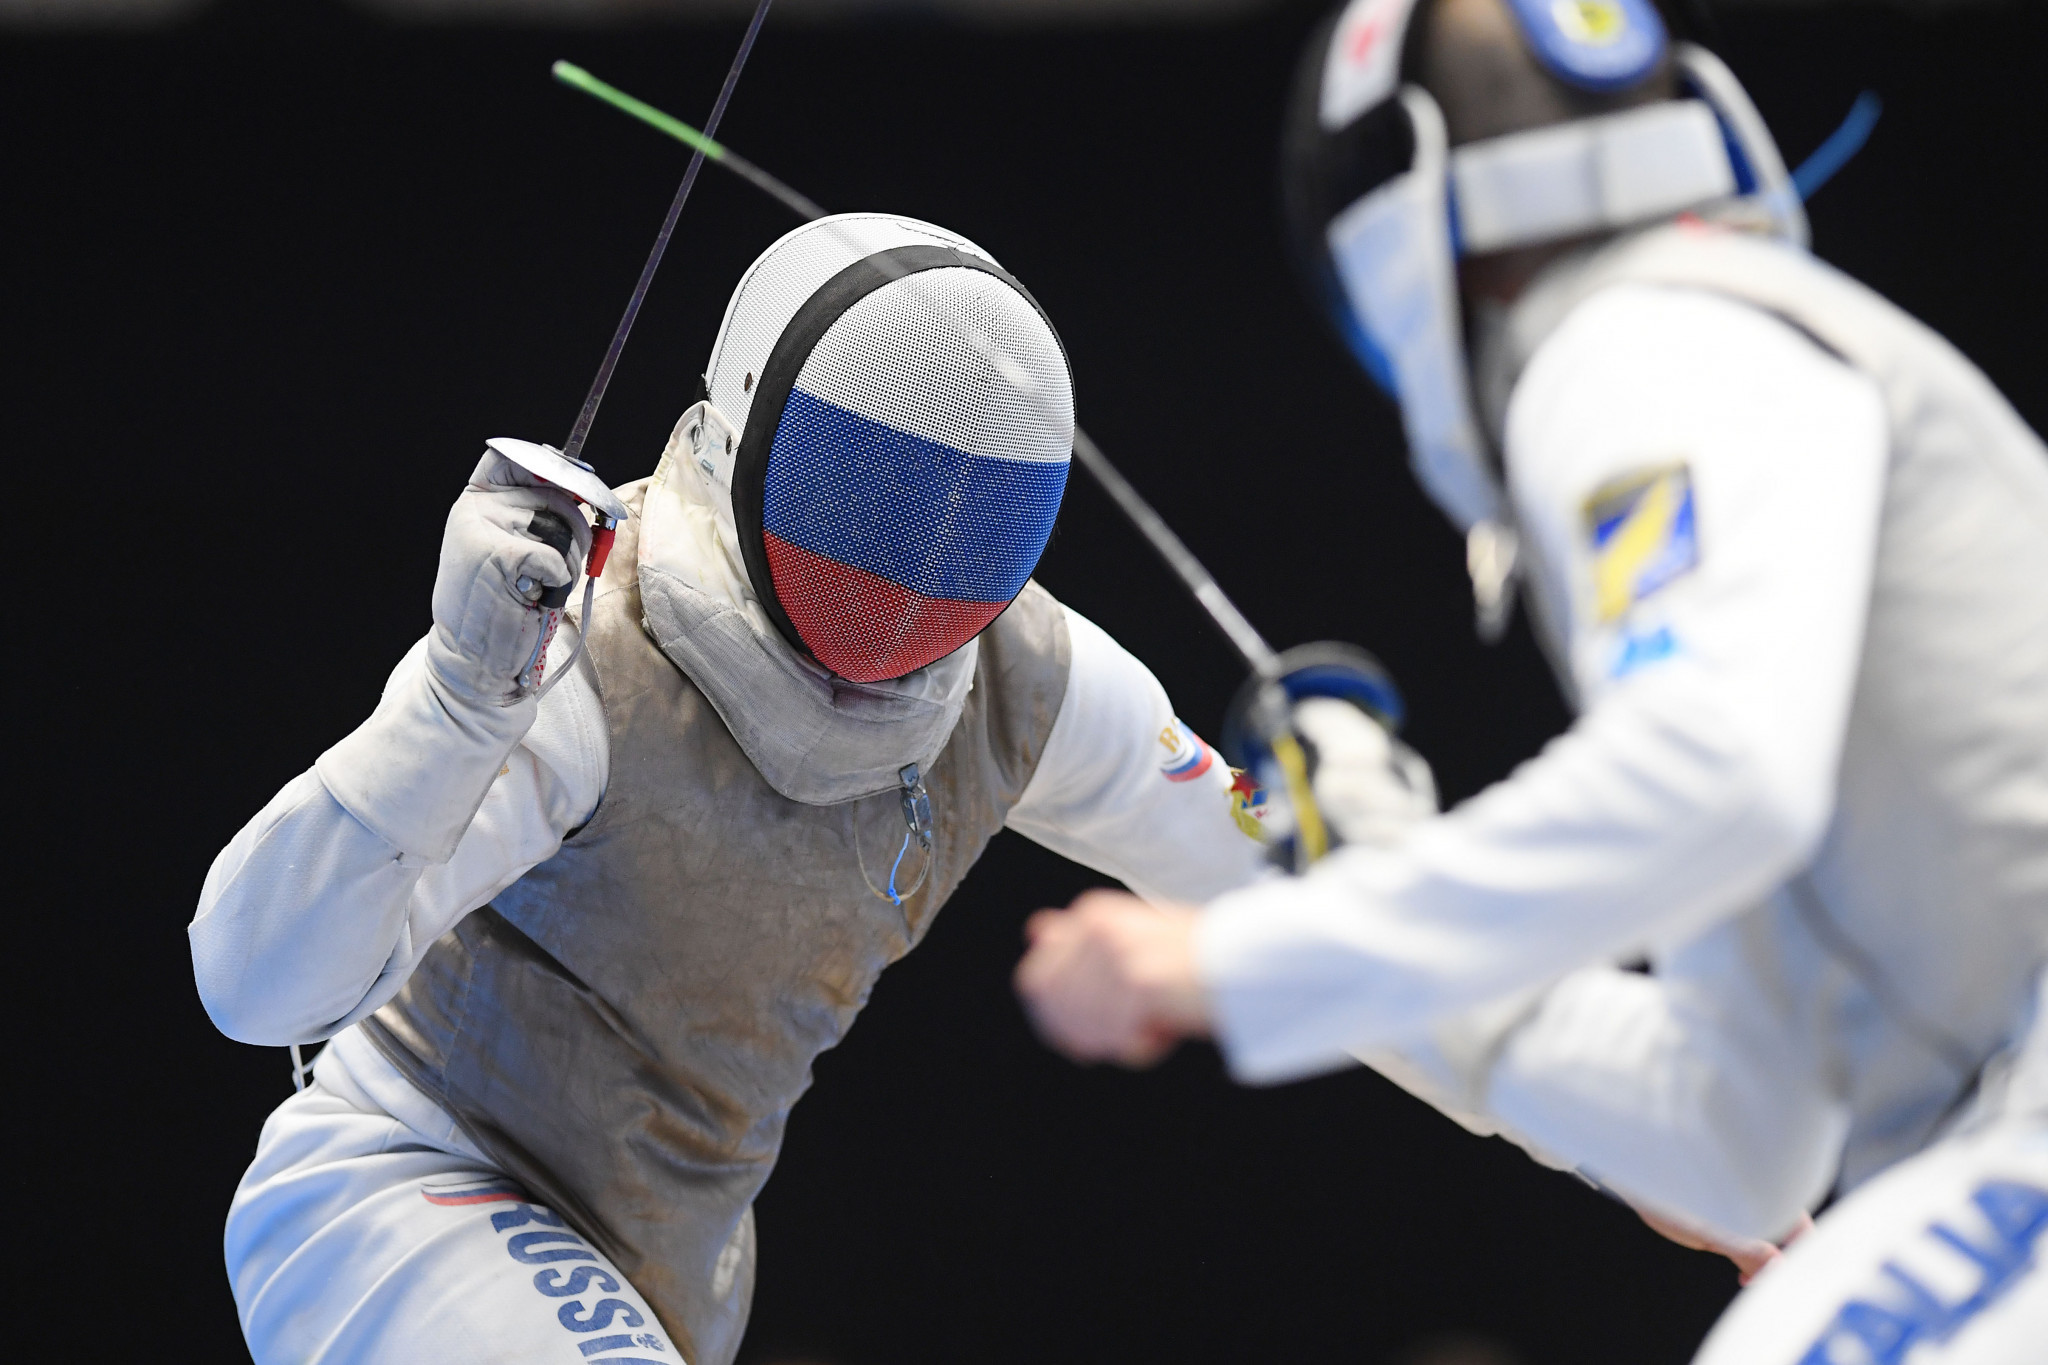 Russian and Belarusian fencers are set to return to FIE competitions from mid-April after a vote last week ©Getty Images